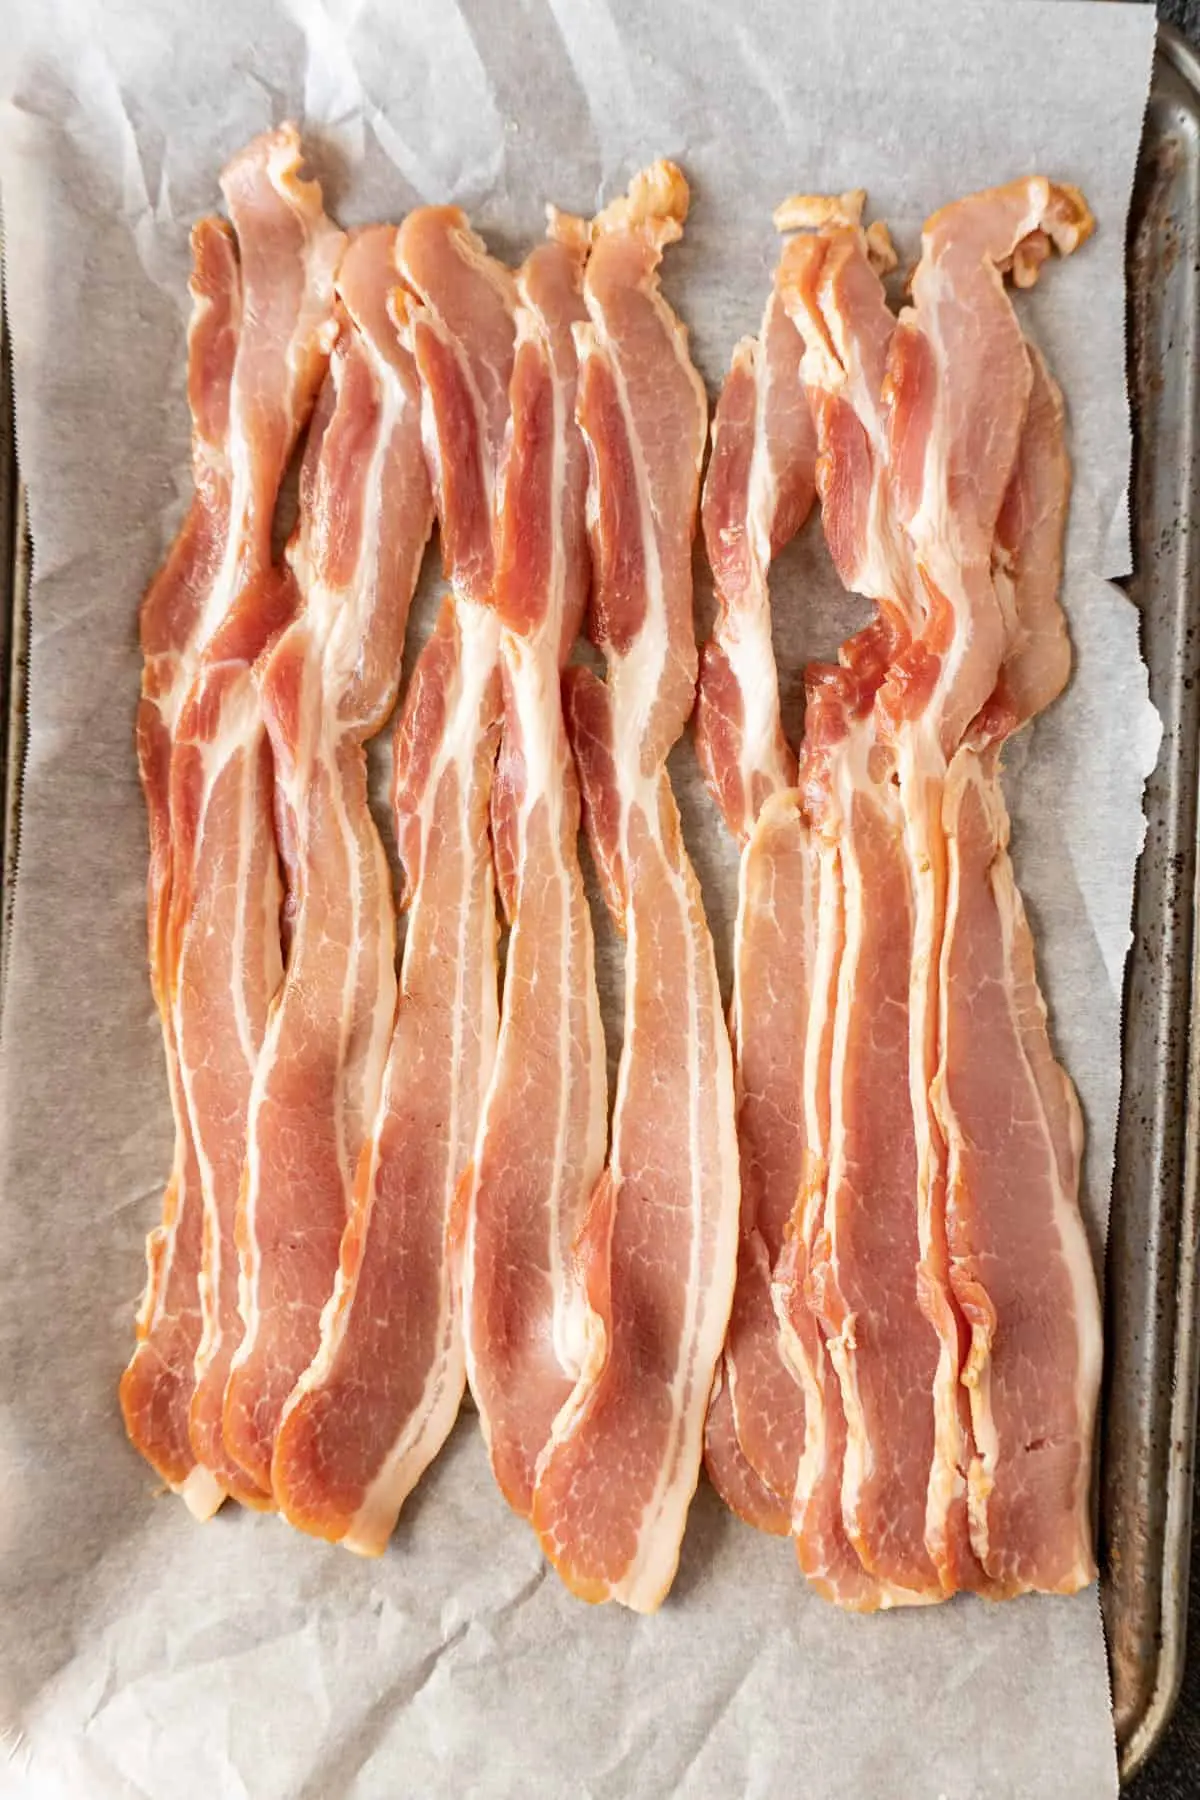 can smoked bacon go bad - How can you tell if cooked bacon is bad